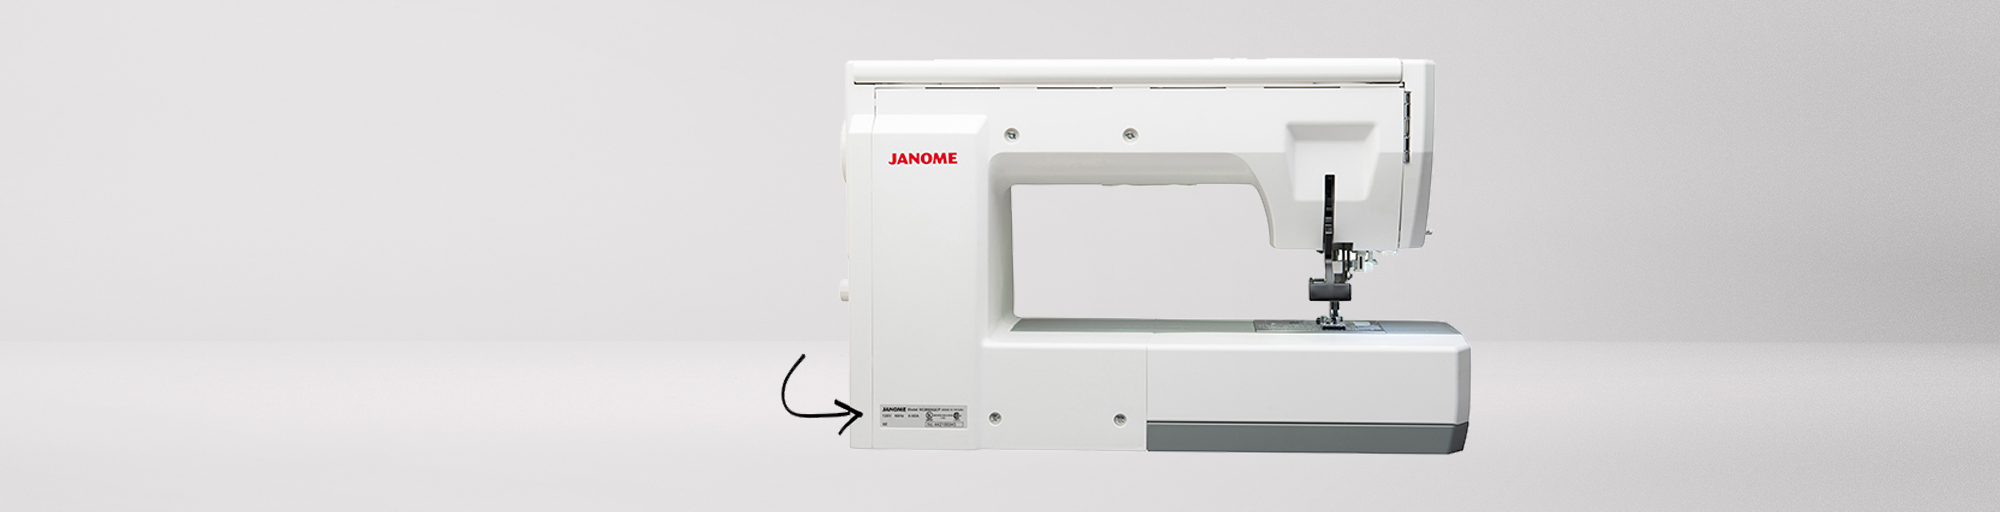 janome sewing machine serial number